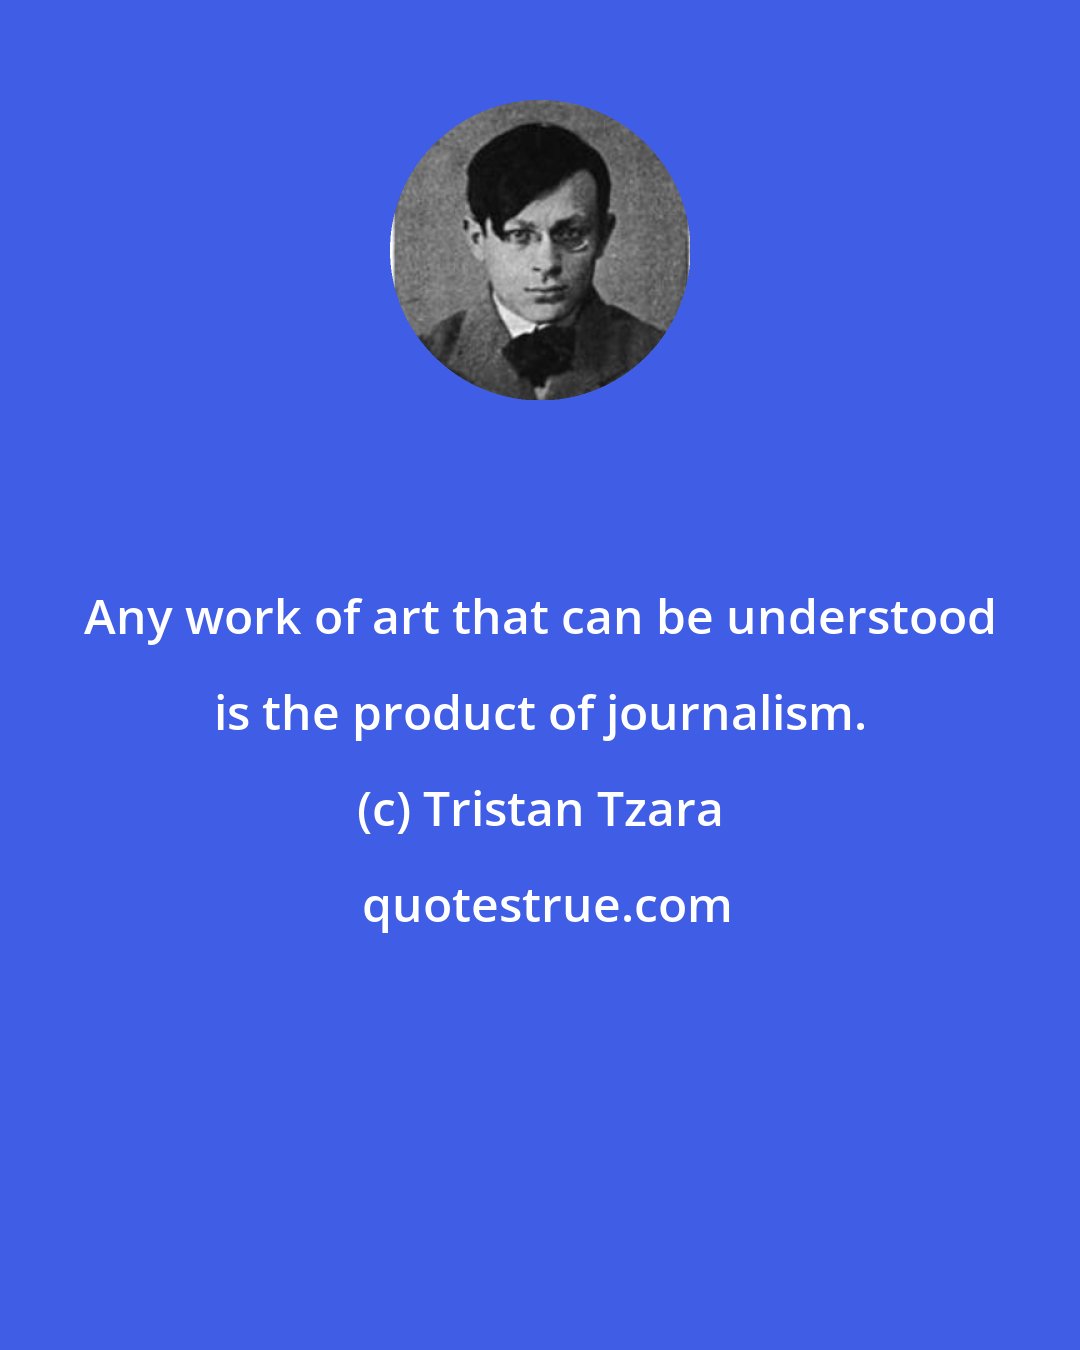 Tristan Tzara: Any work of art that can be understood is the product of journalism.